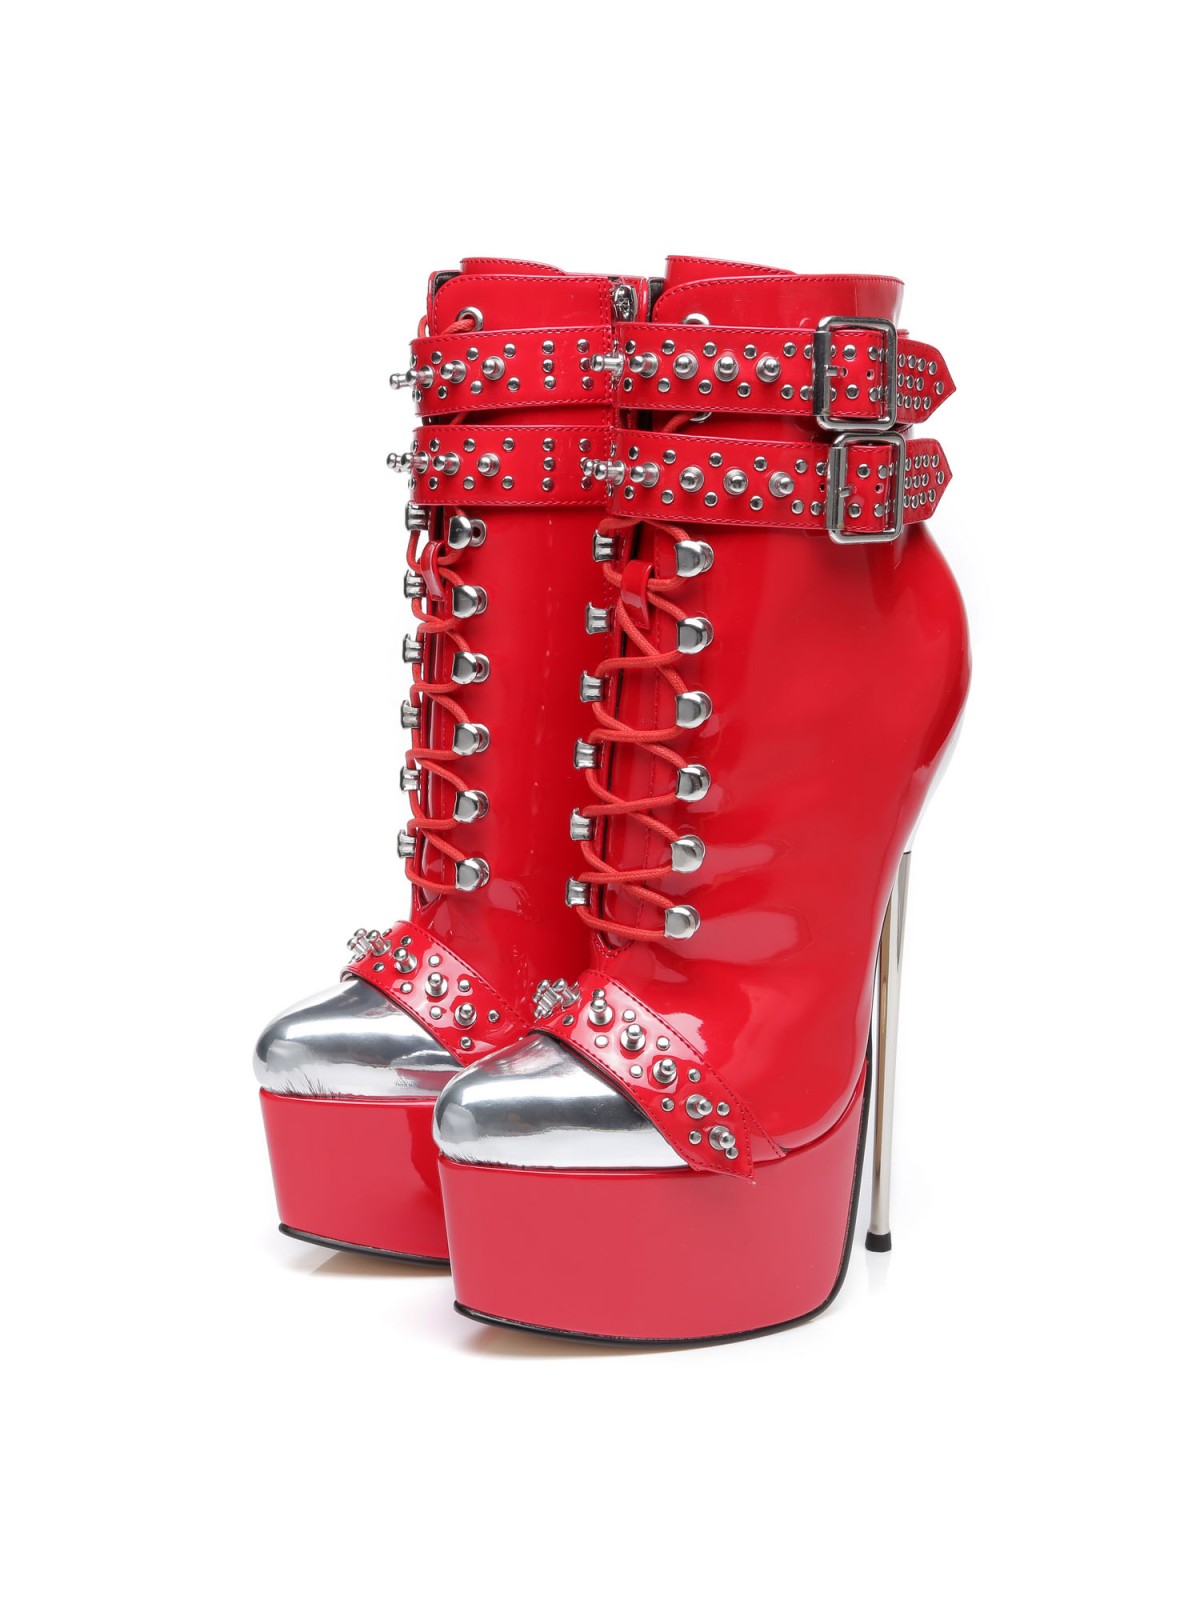 Slick EVIL red booties on extremely heel